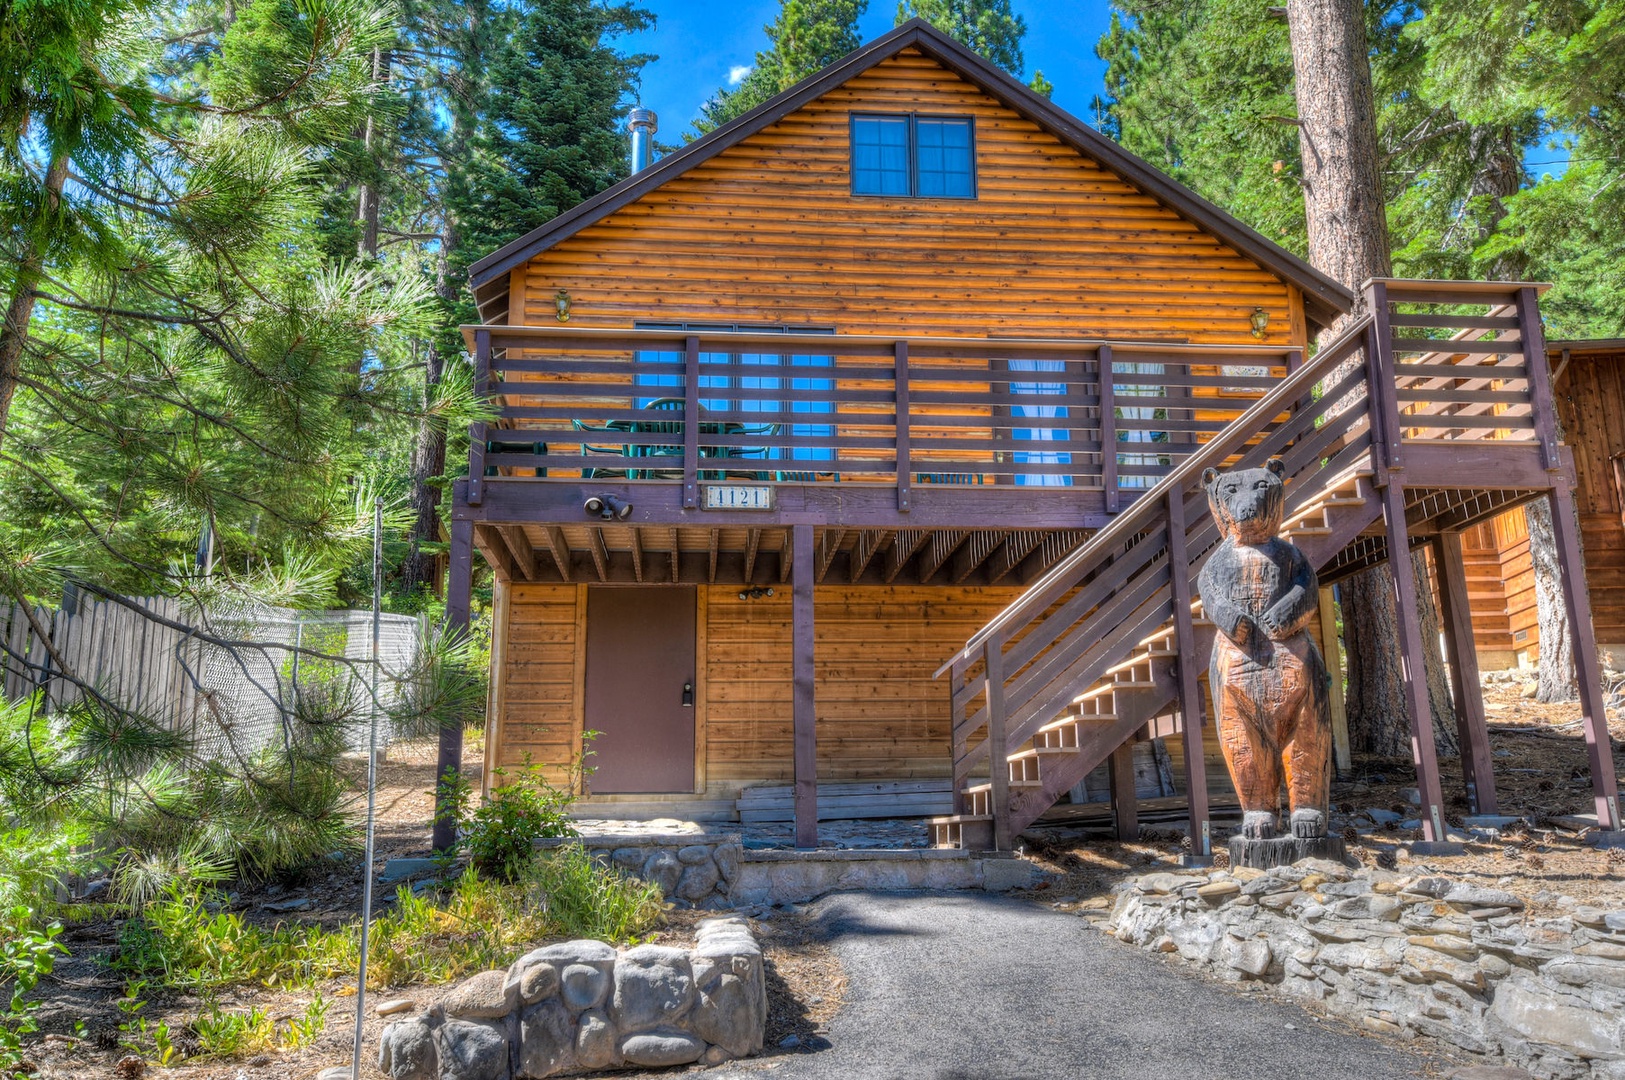 20 mins from Squaw Valley/Olympic Resort, Homewood Resort